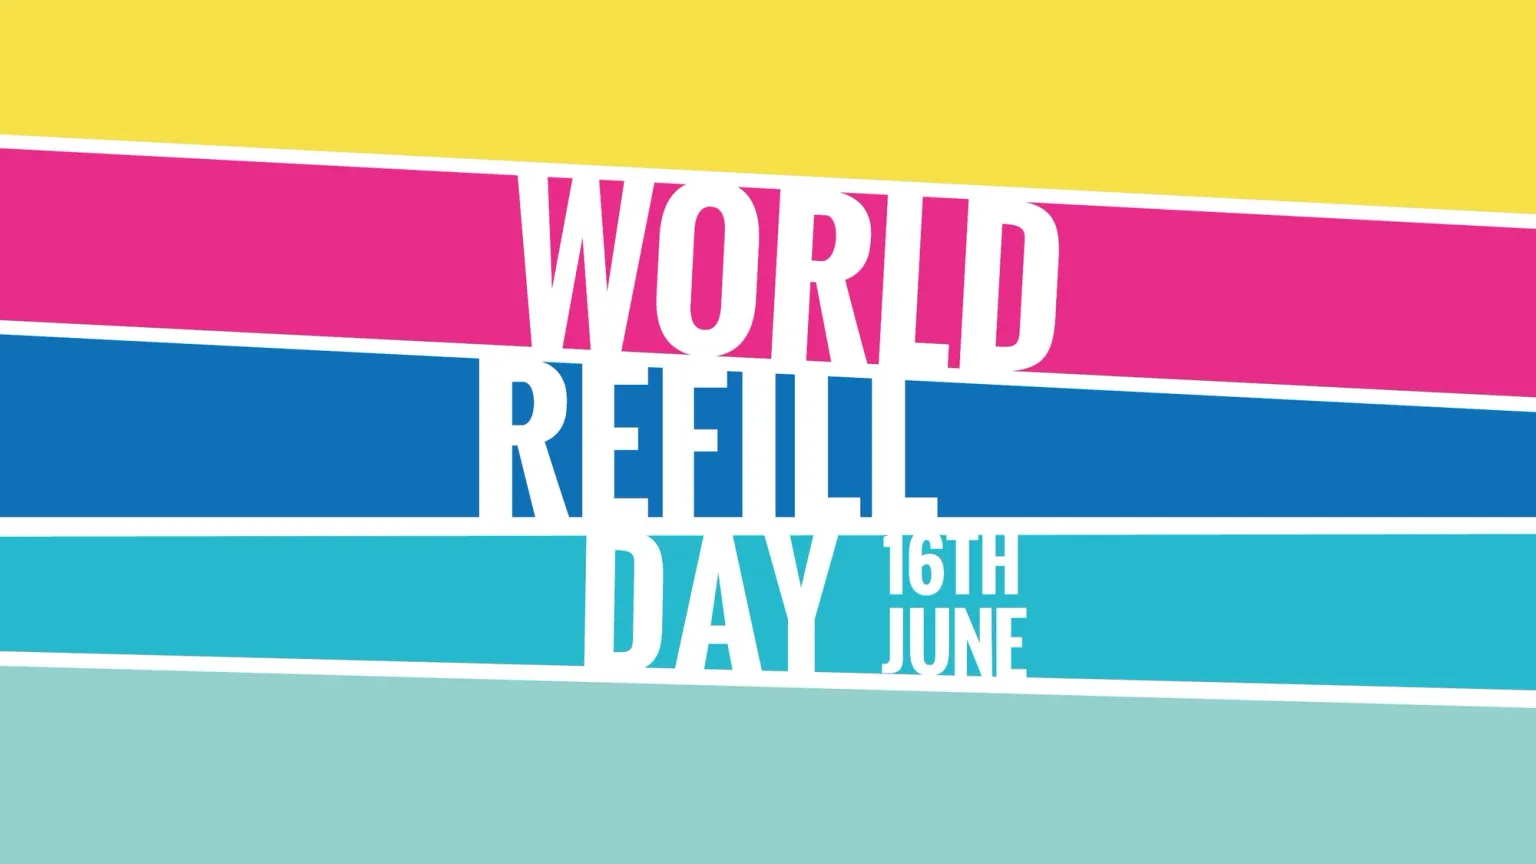 In the run-up to World Refill Day on the 16th June, the annual global awareness campaign to reduce plastic pollution, ethy has teamed up with 